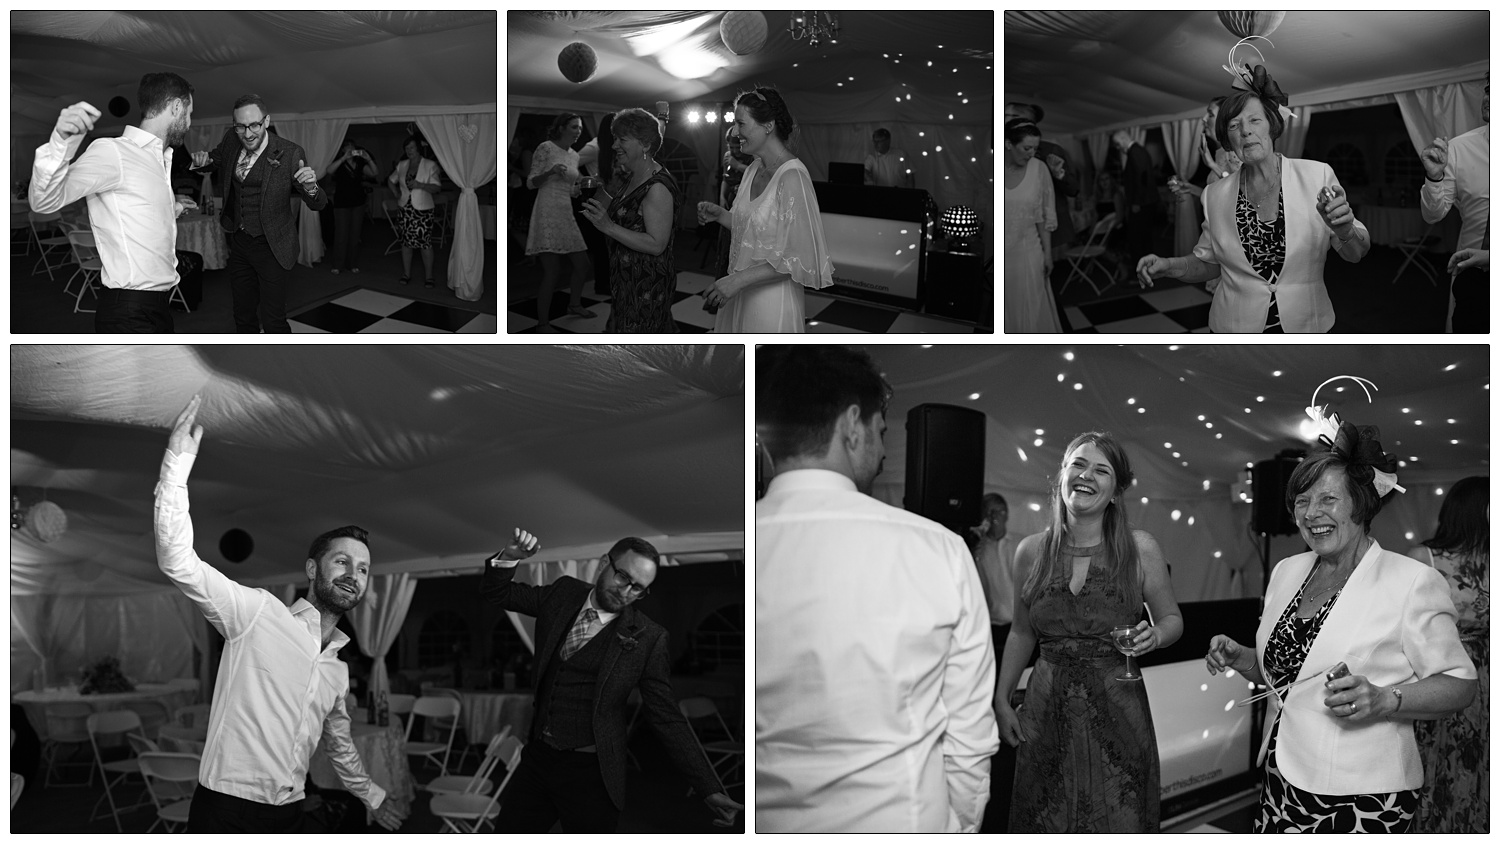 Black and white photographs of people dancing in a marquee.